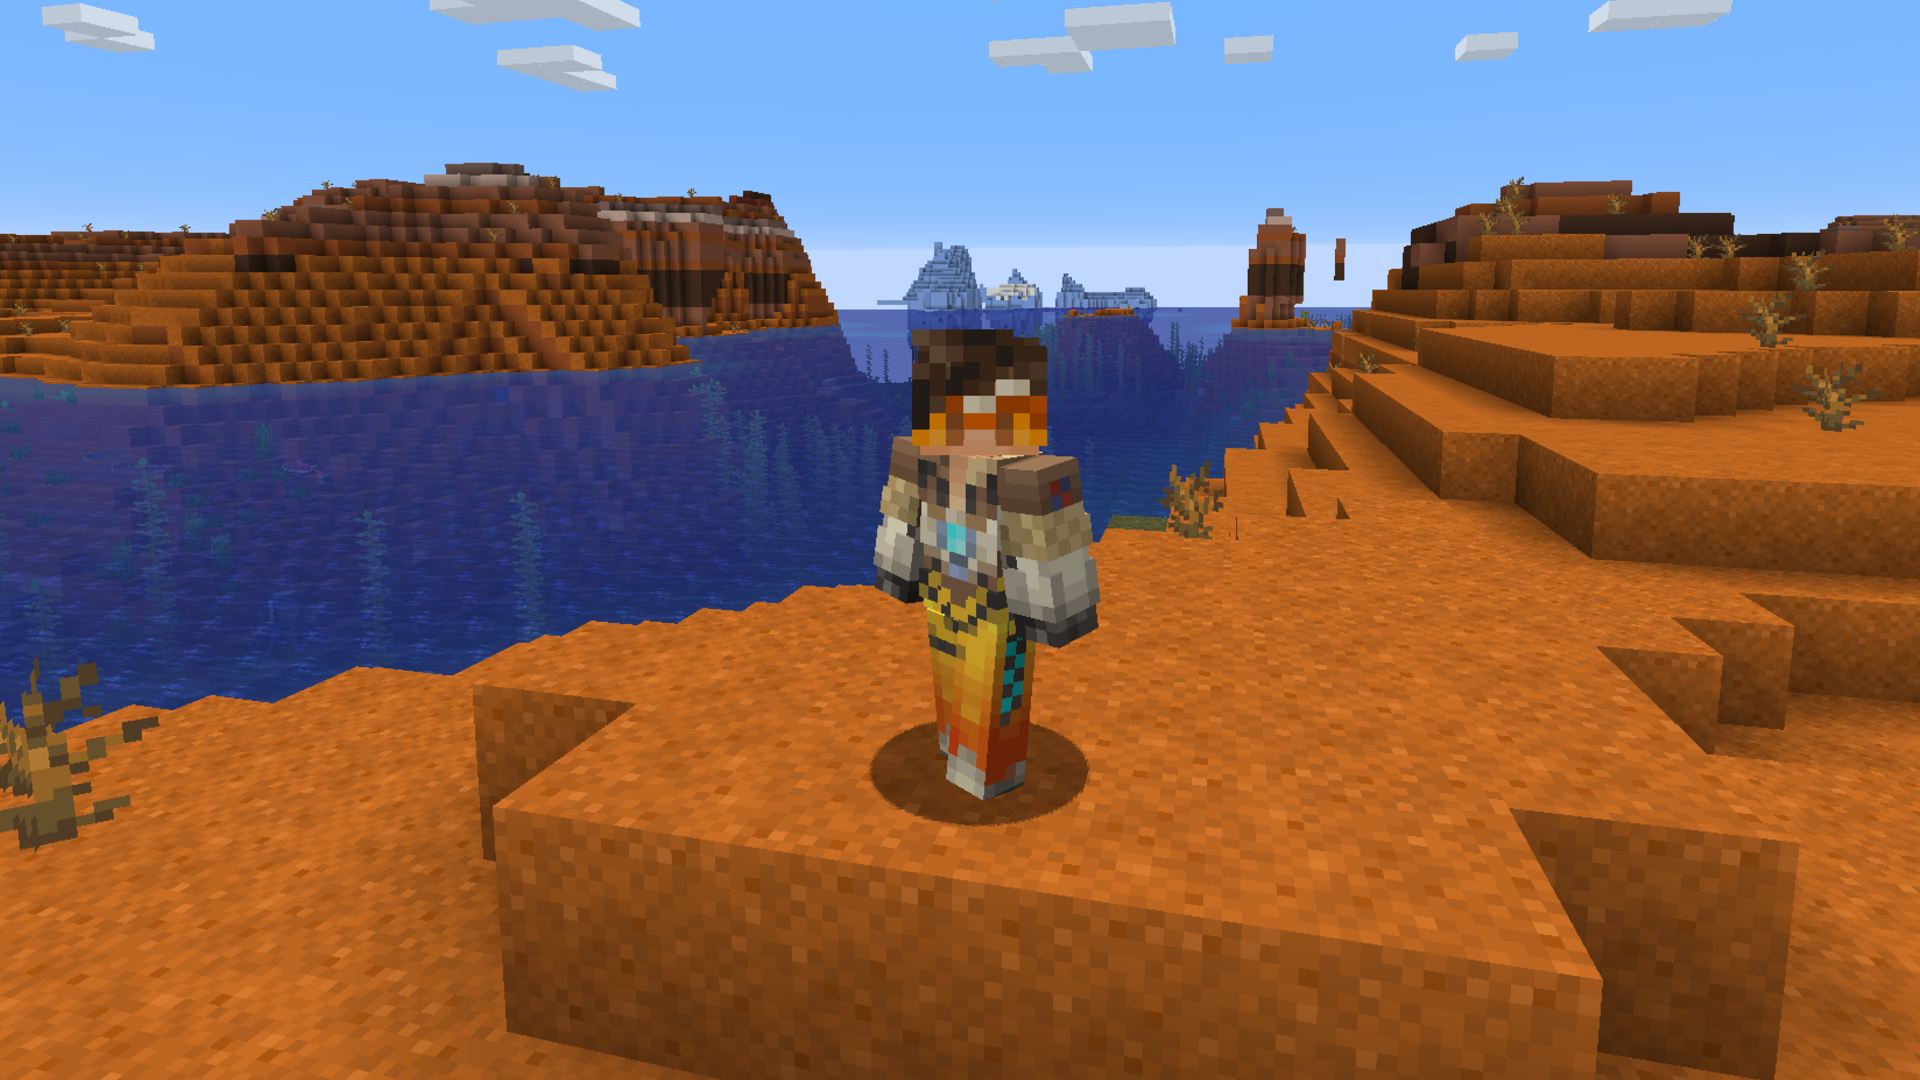 Minecraft skins: a player wearing the Doge skin standing next to a river.